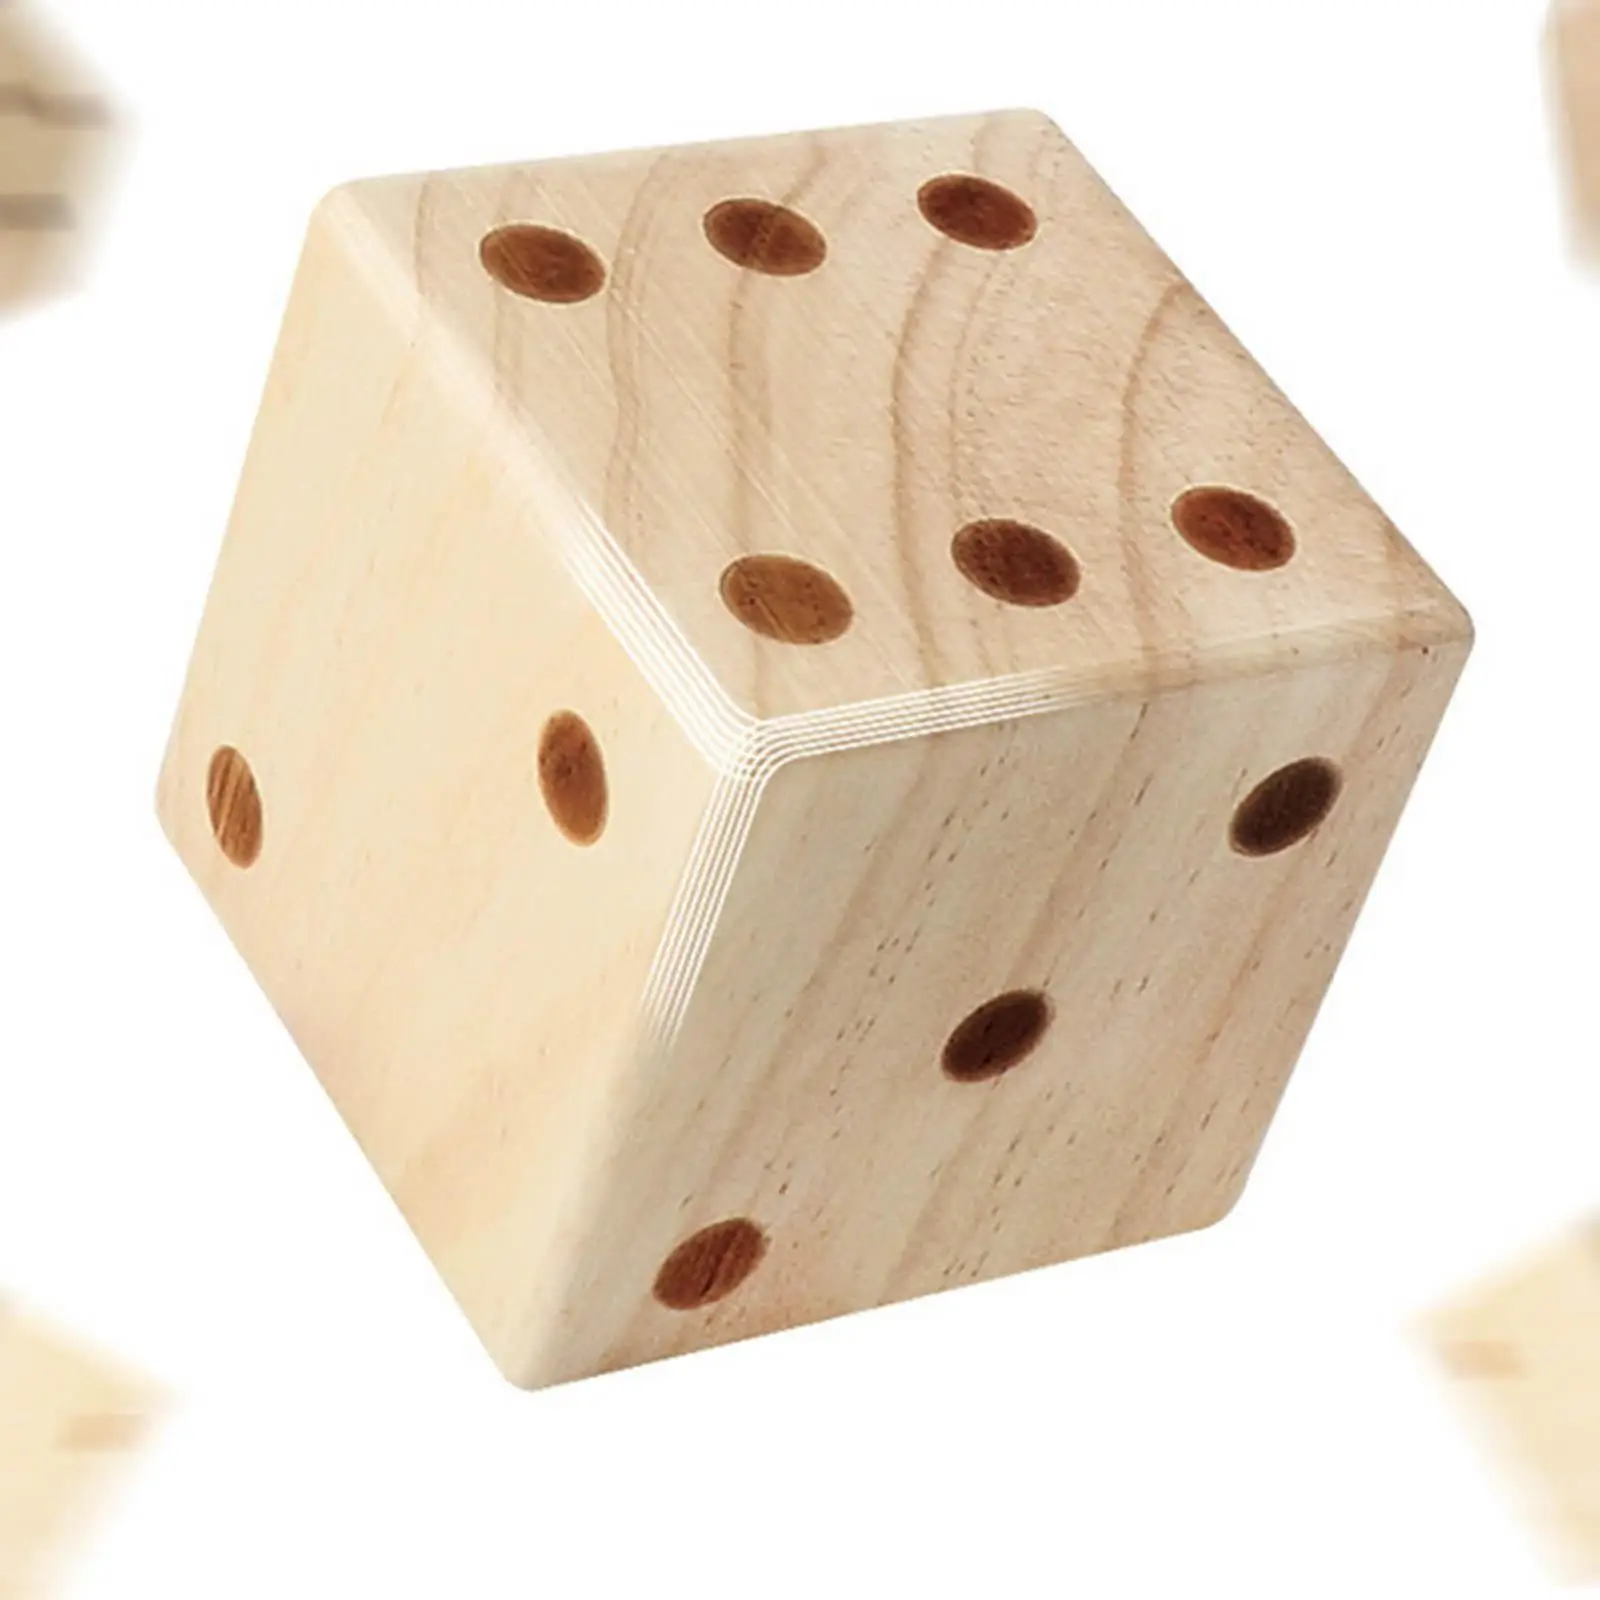 Large Wooden Yard Dice 7cm Smooth Edge Lightweight Role Playing Dice for Game Lawn Sports Equipment Yard Outdoor